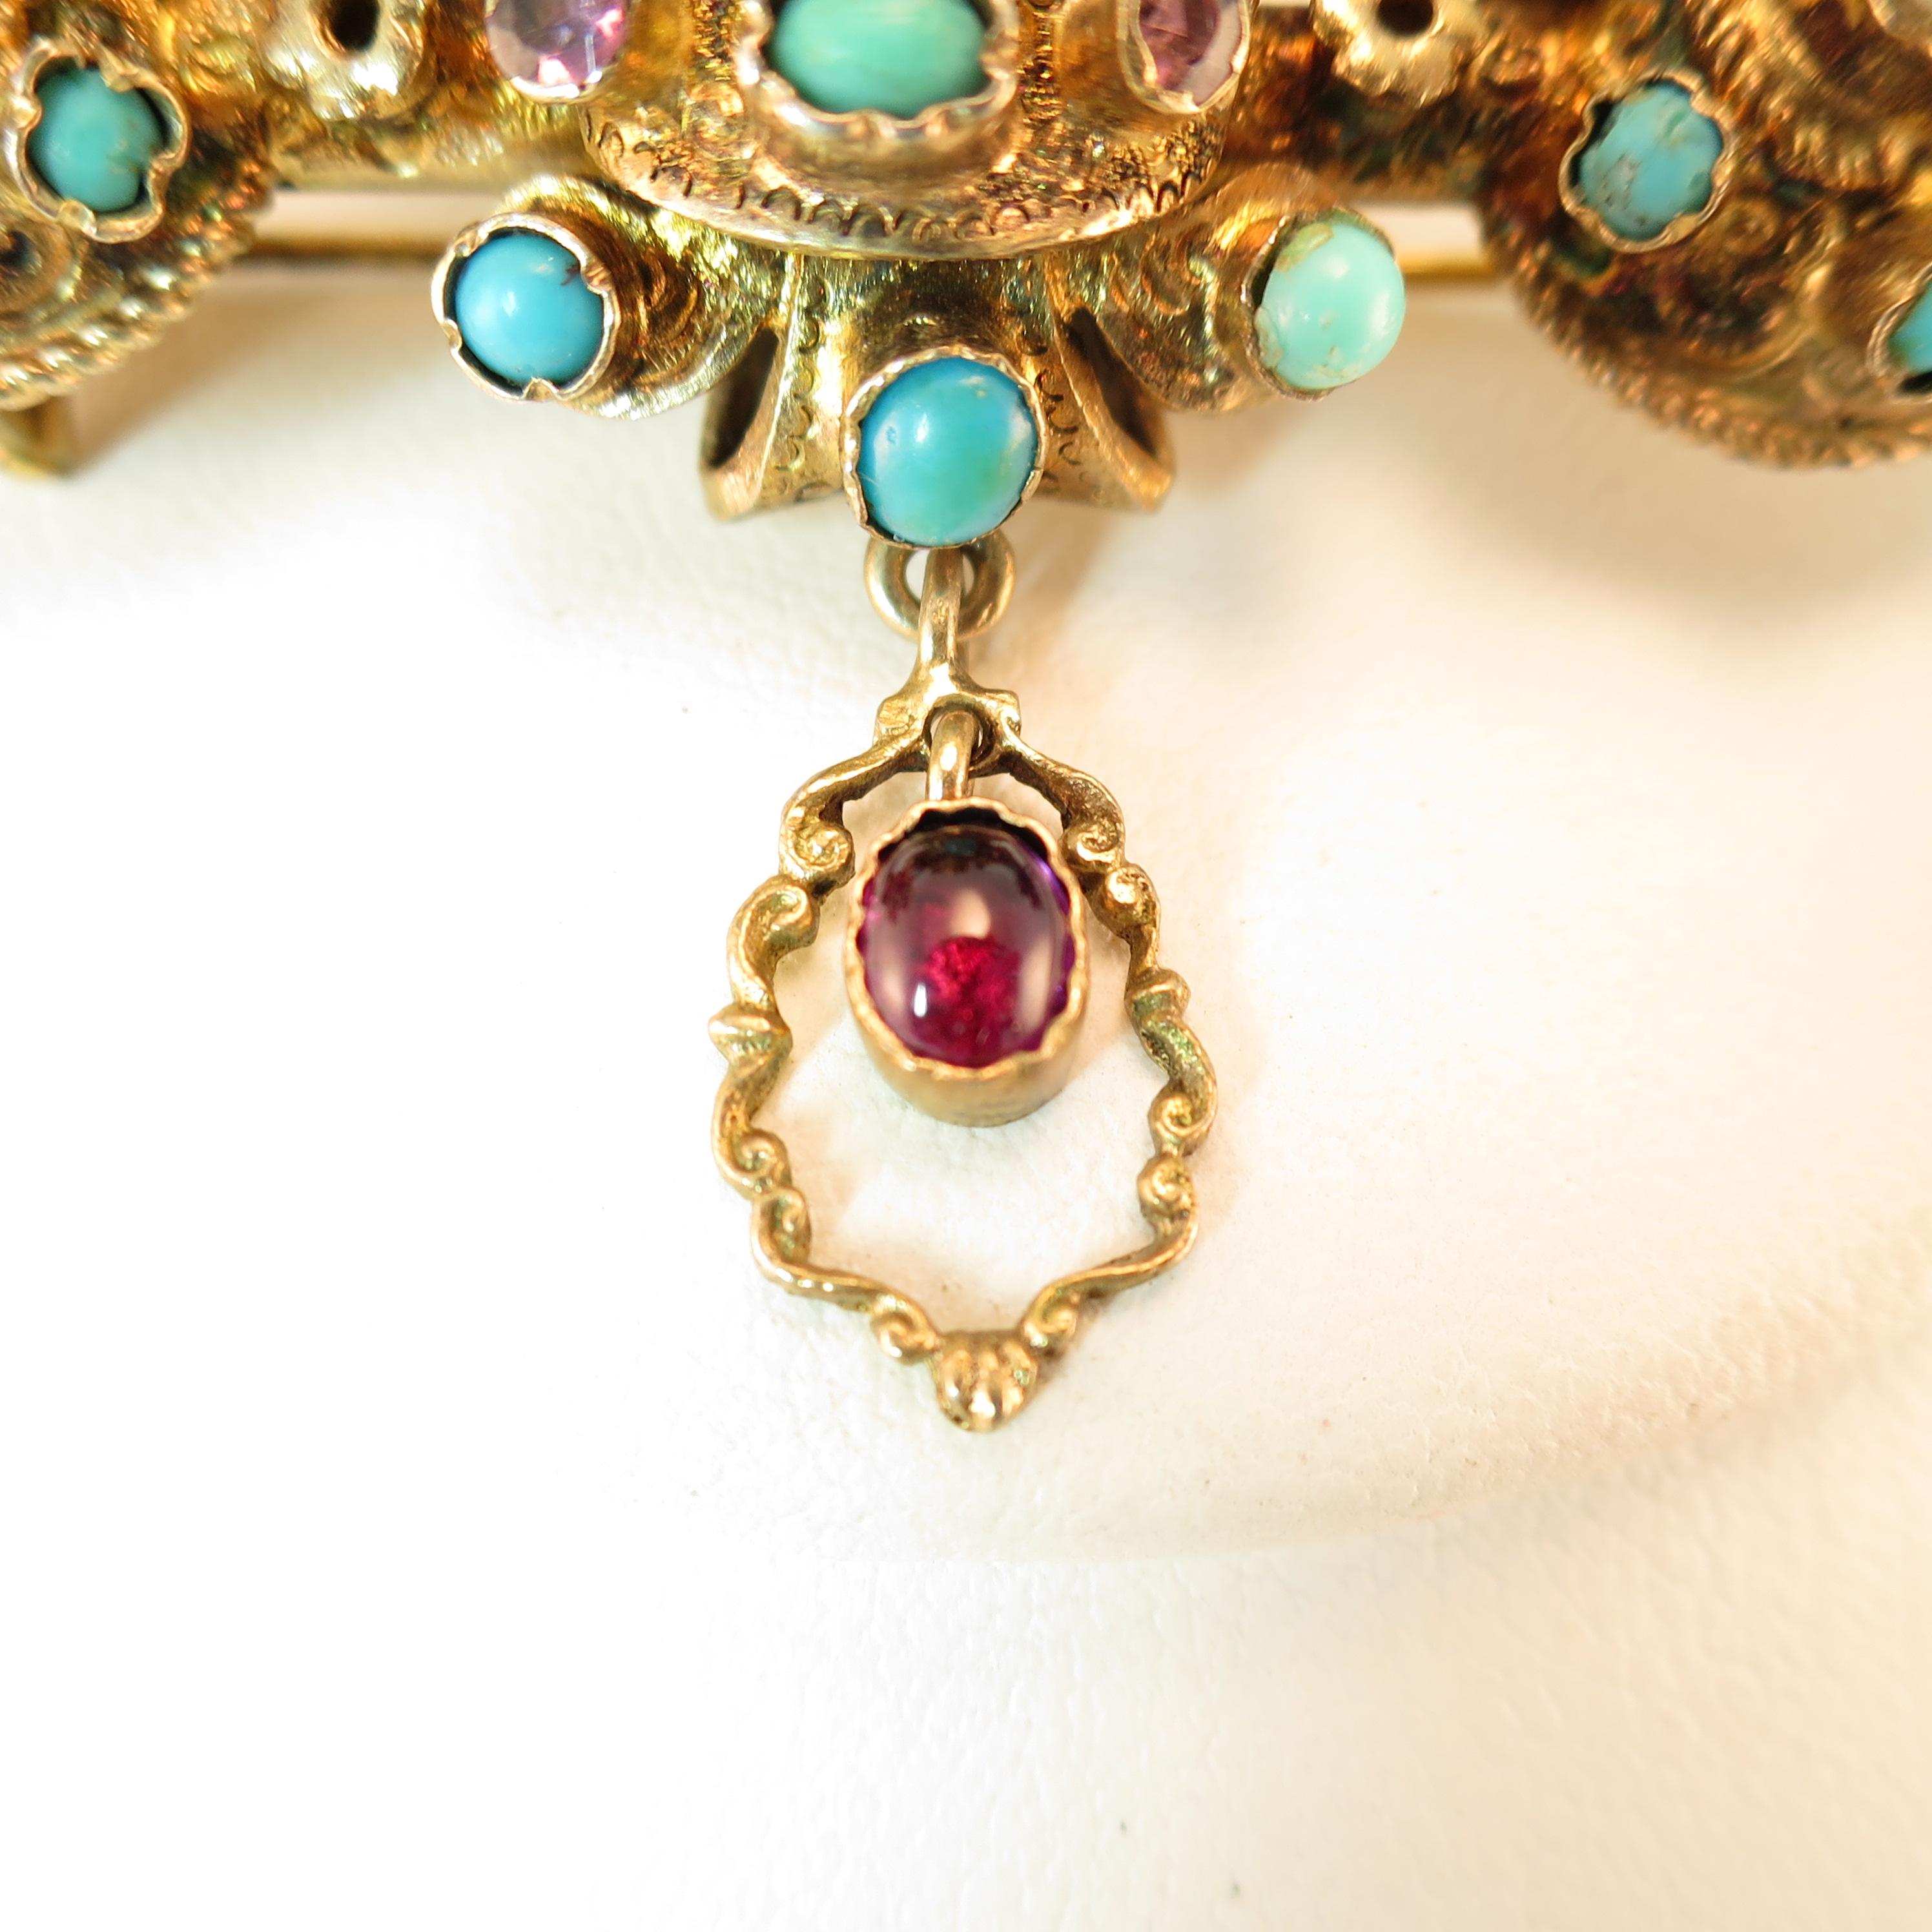 Offered here is a Georgian brooch of solid 10k gold in a deeply three-dimensional baroque design, Circa 1840. The main portion of the brooch is embellished with crimped-bezel-set amethysts, turquoise, garnet, and pearls; below is an etched dangle